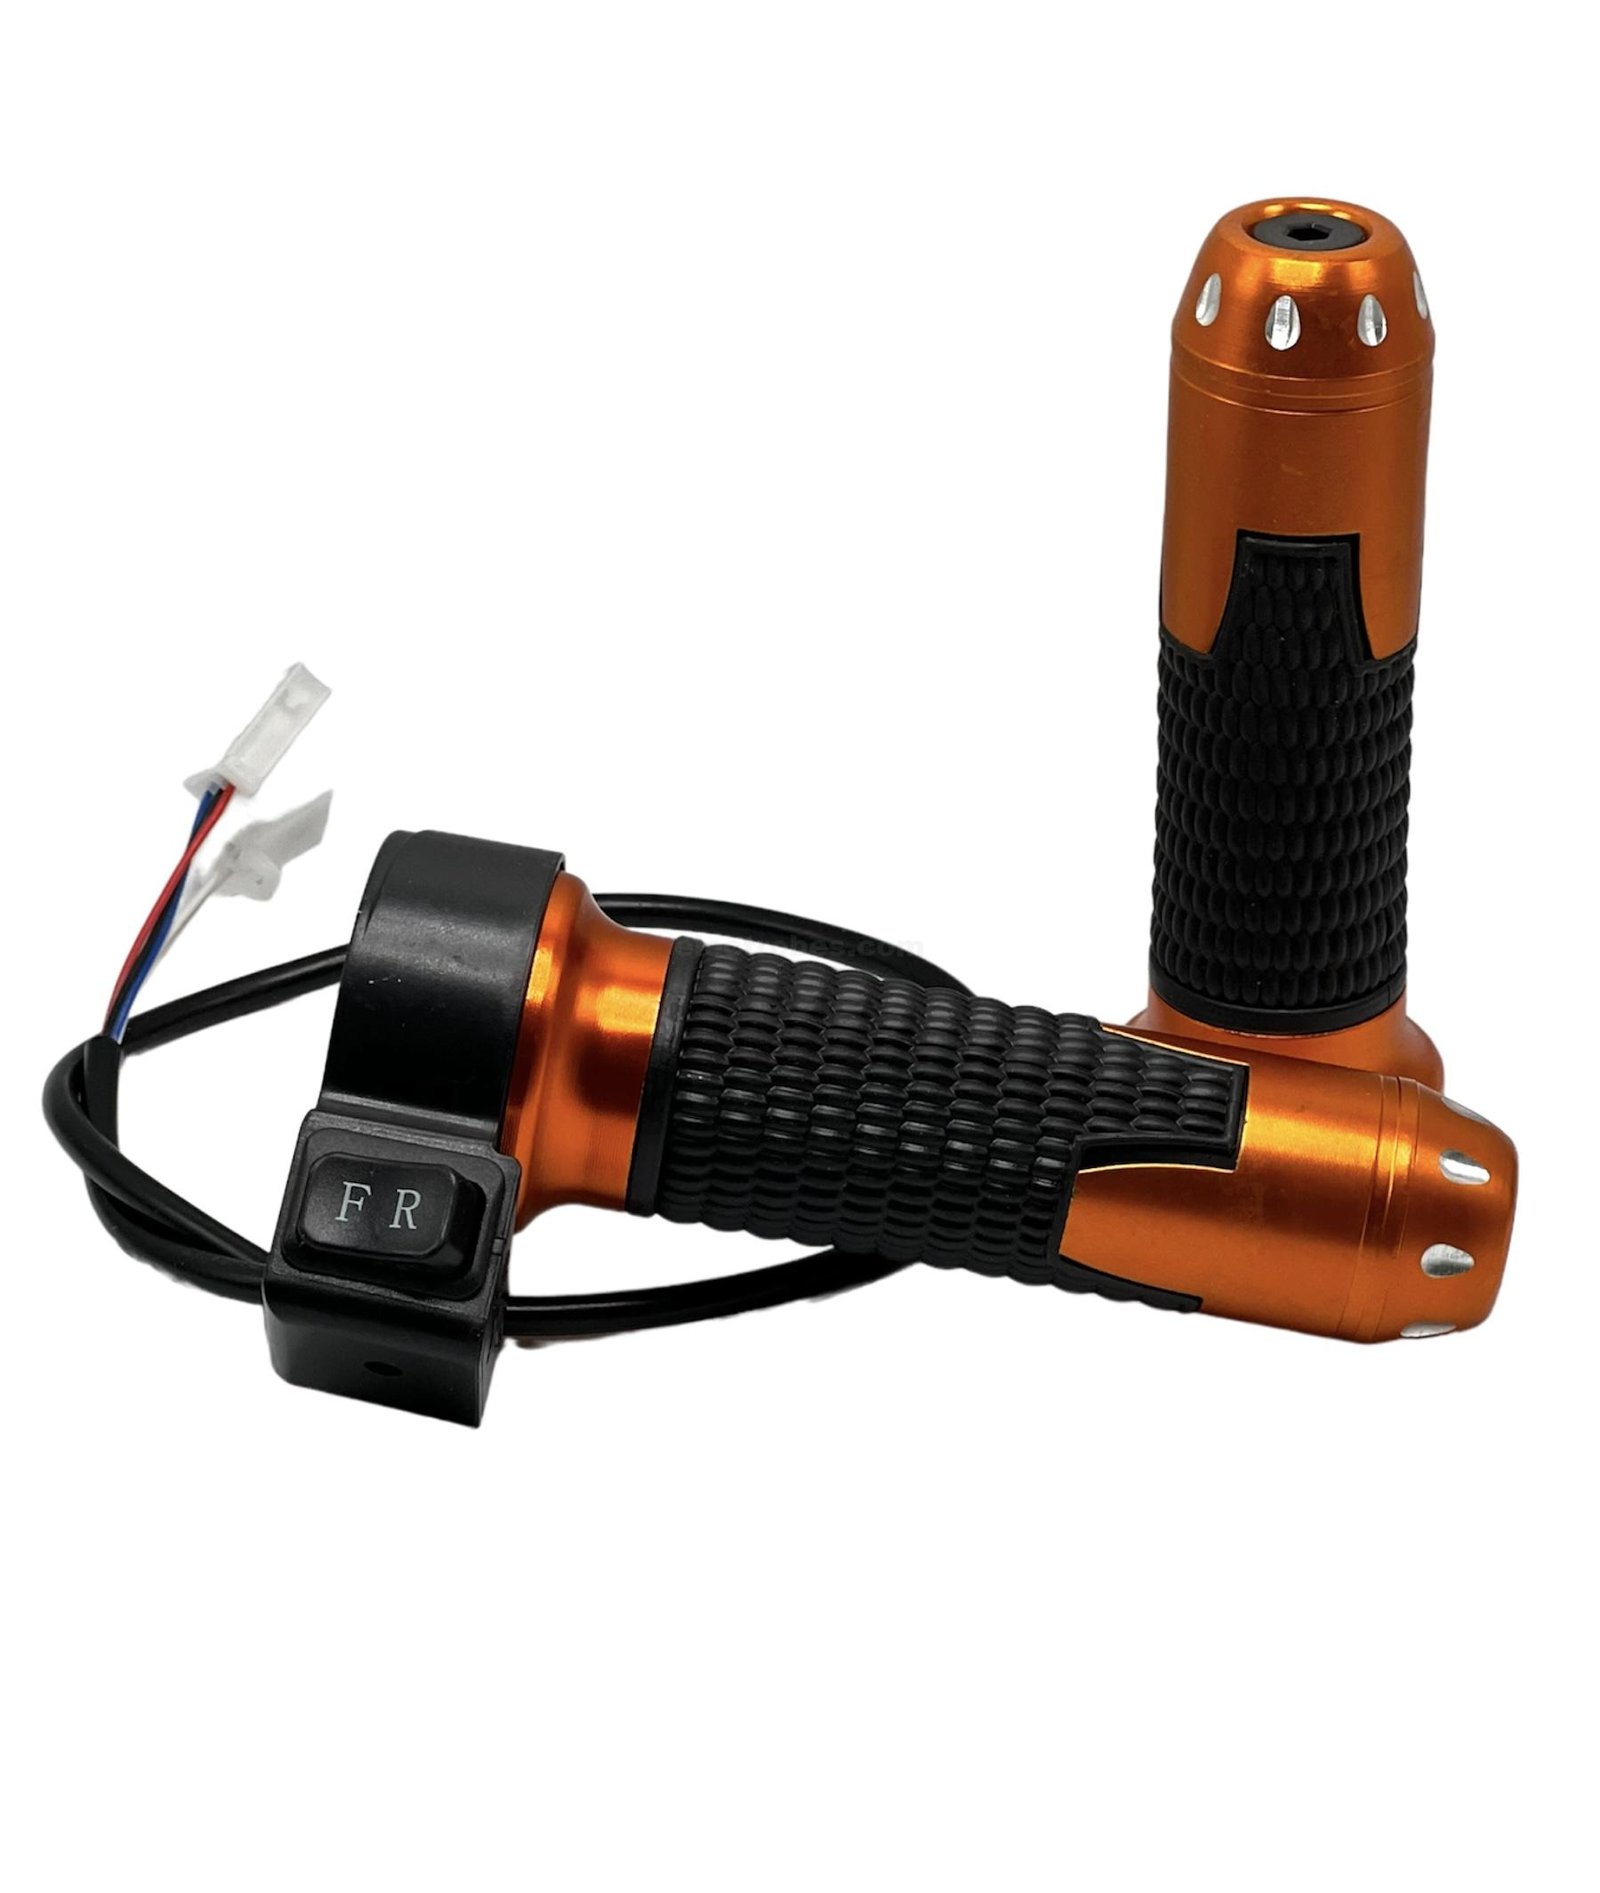 12V 24V 48V 60V 72V Red Copper Throttle handle bar with switches and wires set for electric bike e-bike at best price online in islamabad rawalpindi lahore karachi multan sukkur skardu peshawar taxila wah gujranwala faisalabad hyderabad quetta pakistan